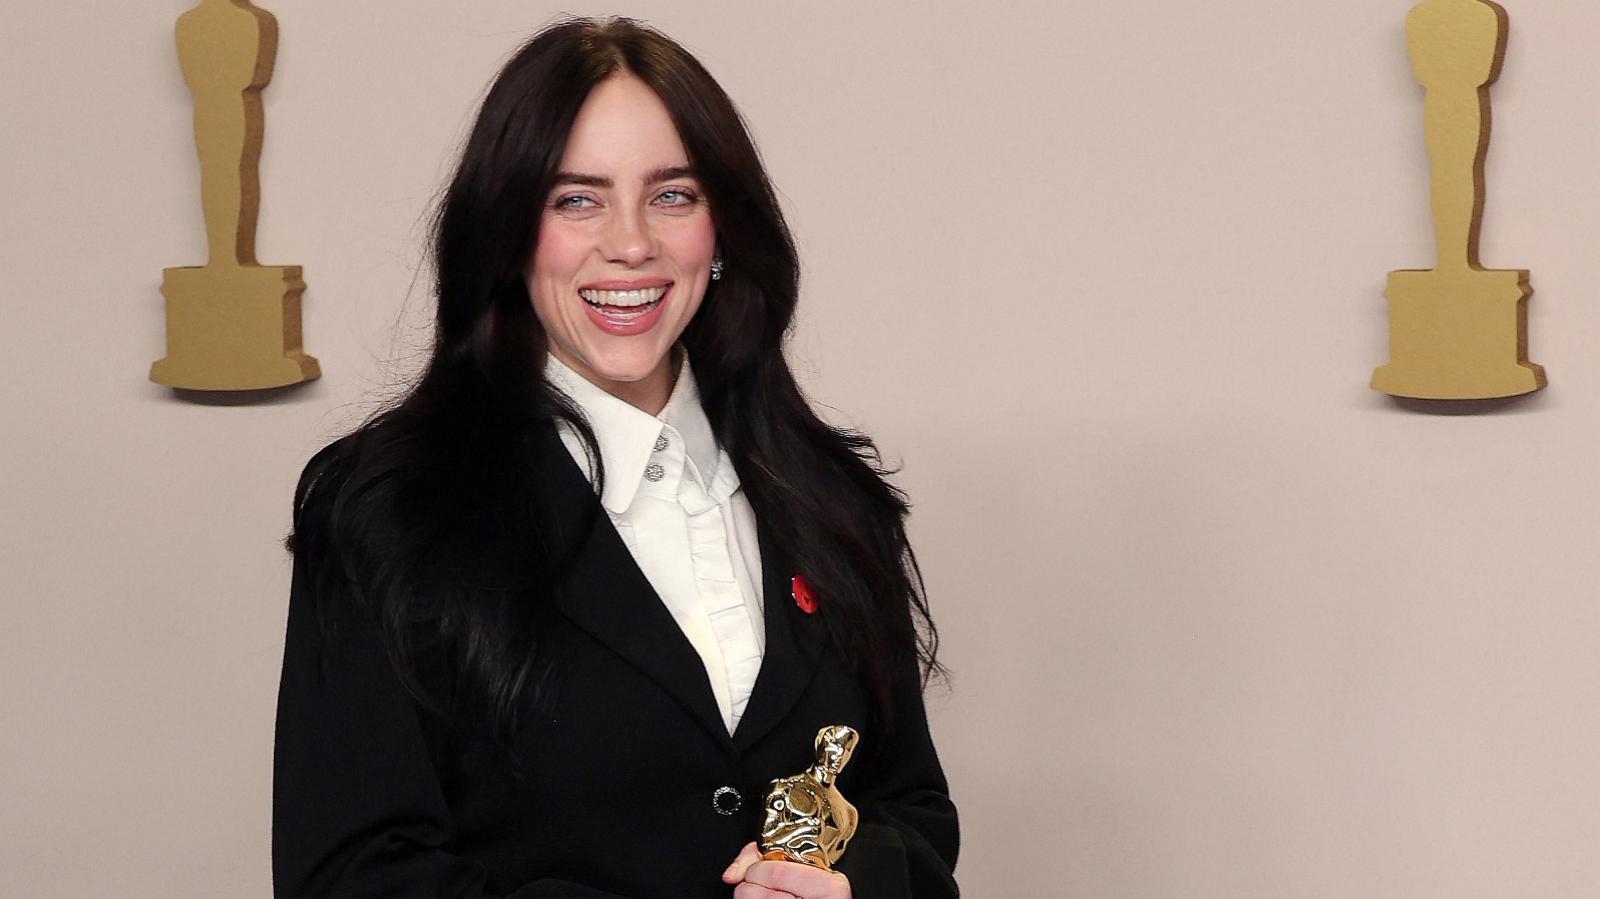 PHOTO: Billie Eilish poses with the Oscar for Best Original Song for "What Was I Made For?" from "Barbie" in the Oscars photo room at the 96th Academy Awards in Hollywood, Los Angeles, March 10, 2024.